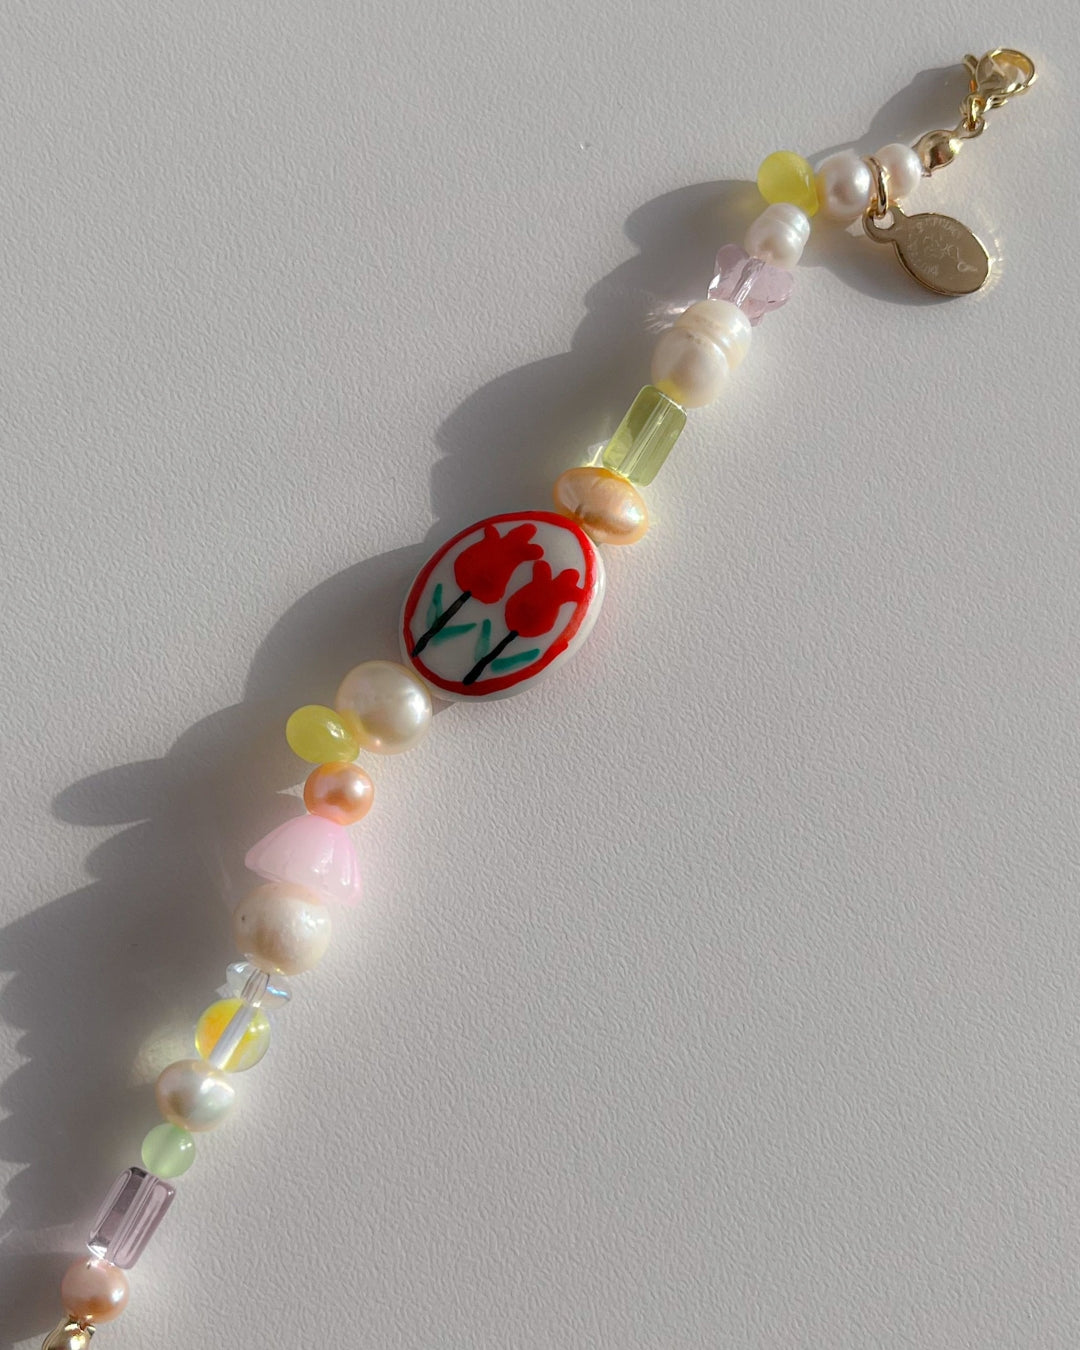 A close up studio shot of Buttercup Studio's Tulip Field Freshwater Pearls Bracelet. Made with assorted freshwater pearls, pink and yellow beads and a lampwork hand painted glass bead with two red tulips.